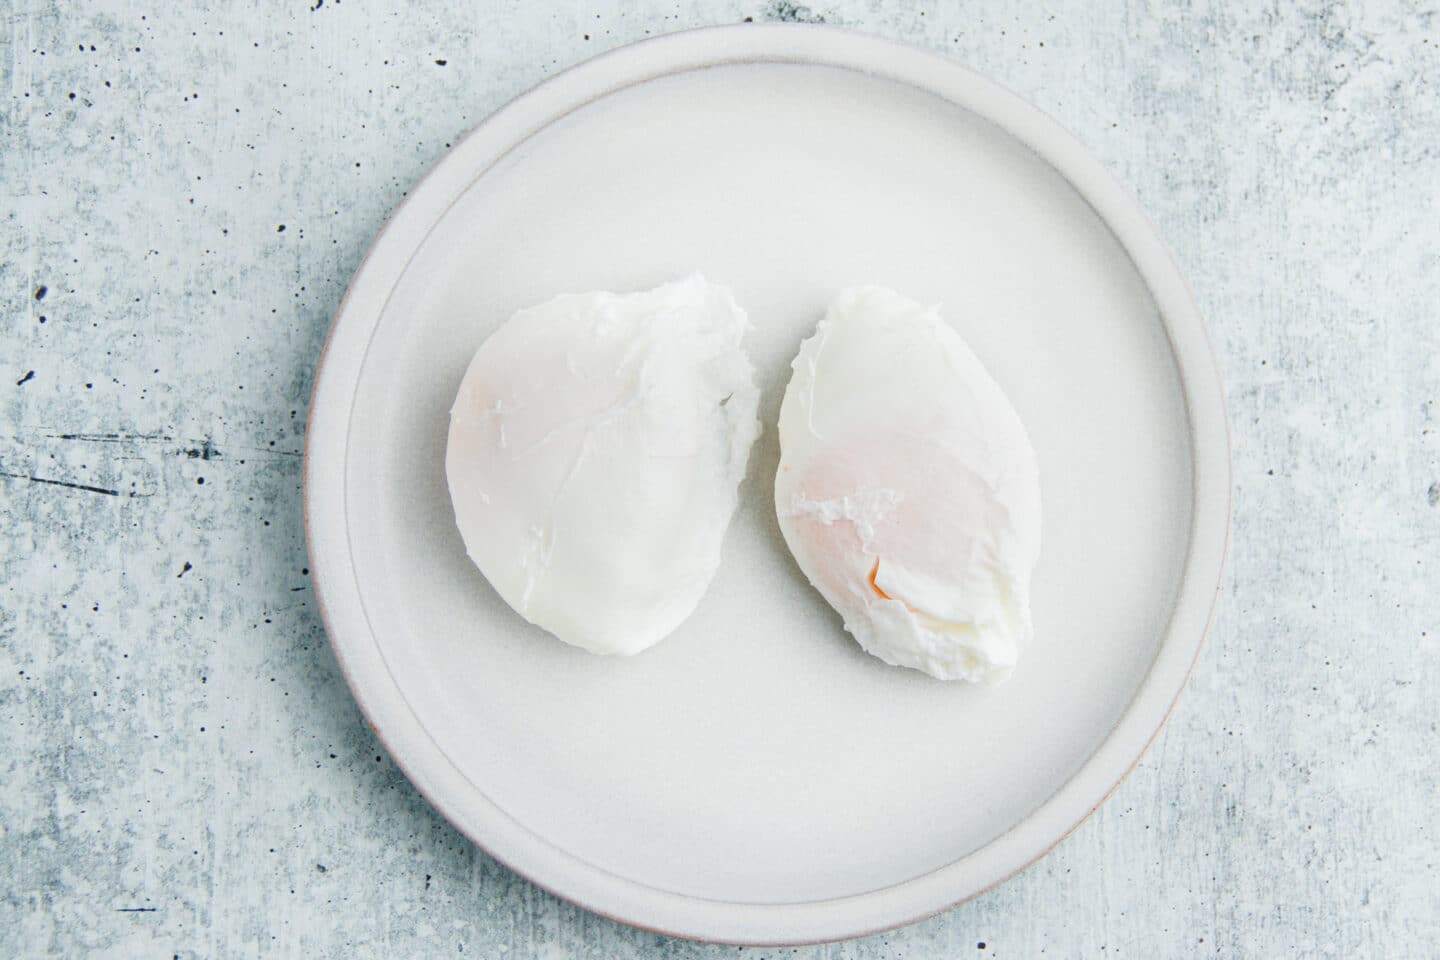 This is a picture of two poached eggs on a plate.